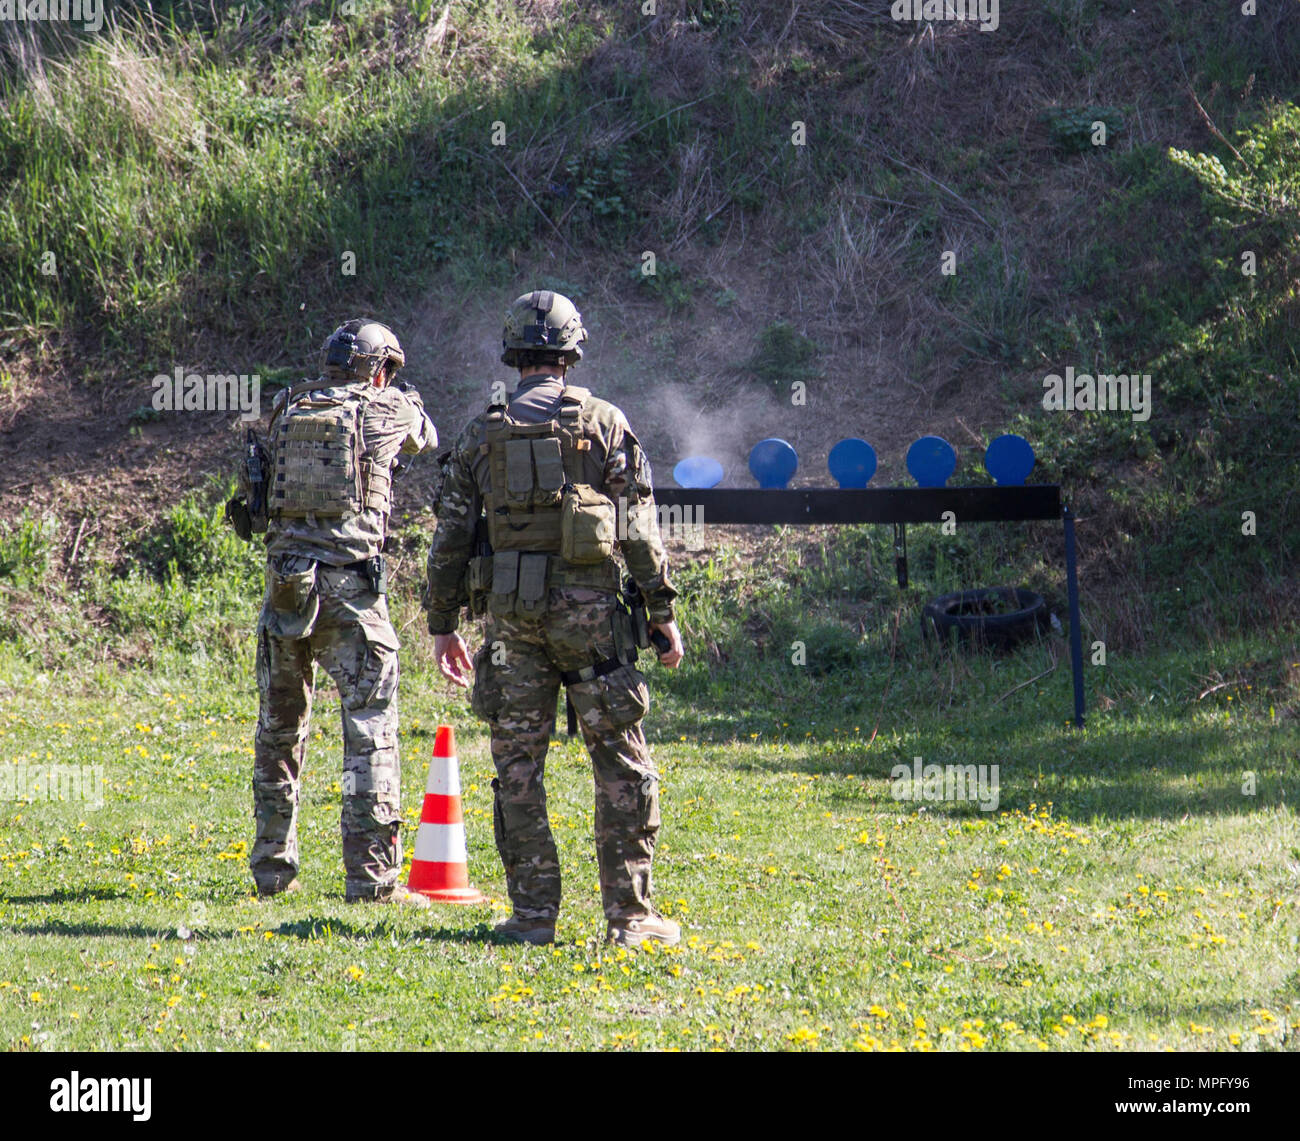 U.S. and Slovenian special operation forces demonstrate the pistol portion of a stress-shoot to the Serbian Special Anti-Terrorist Unit during a Joint Combined Exchange Training at the SAJ headquarters complex, Serbia, April 3-30, 2017. The unit serves as a special operations and tactical unit of the Serbian Police and received training in a variety of tactics and techniques over the course of the JCET to increase their effectiveness in future operations. Stock Photo